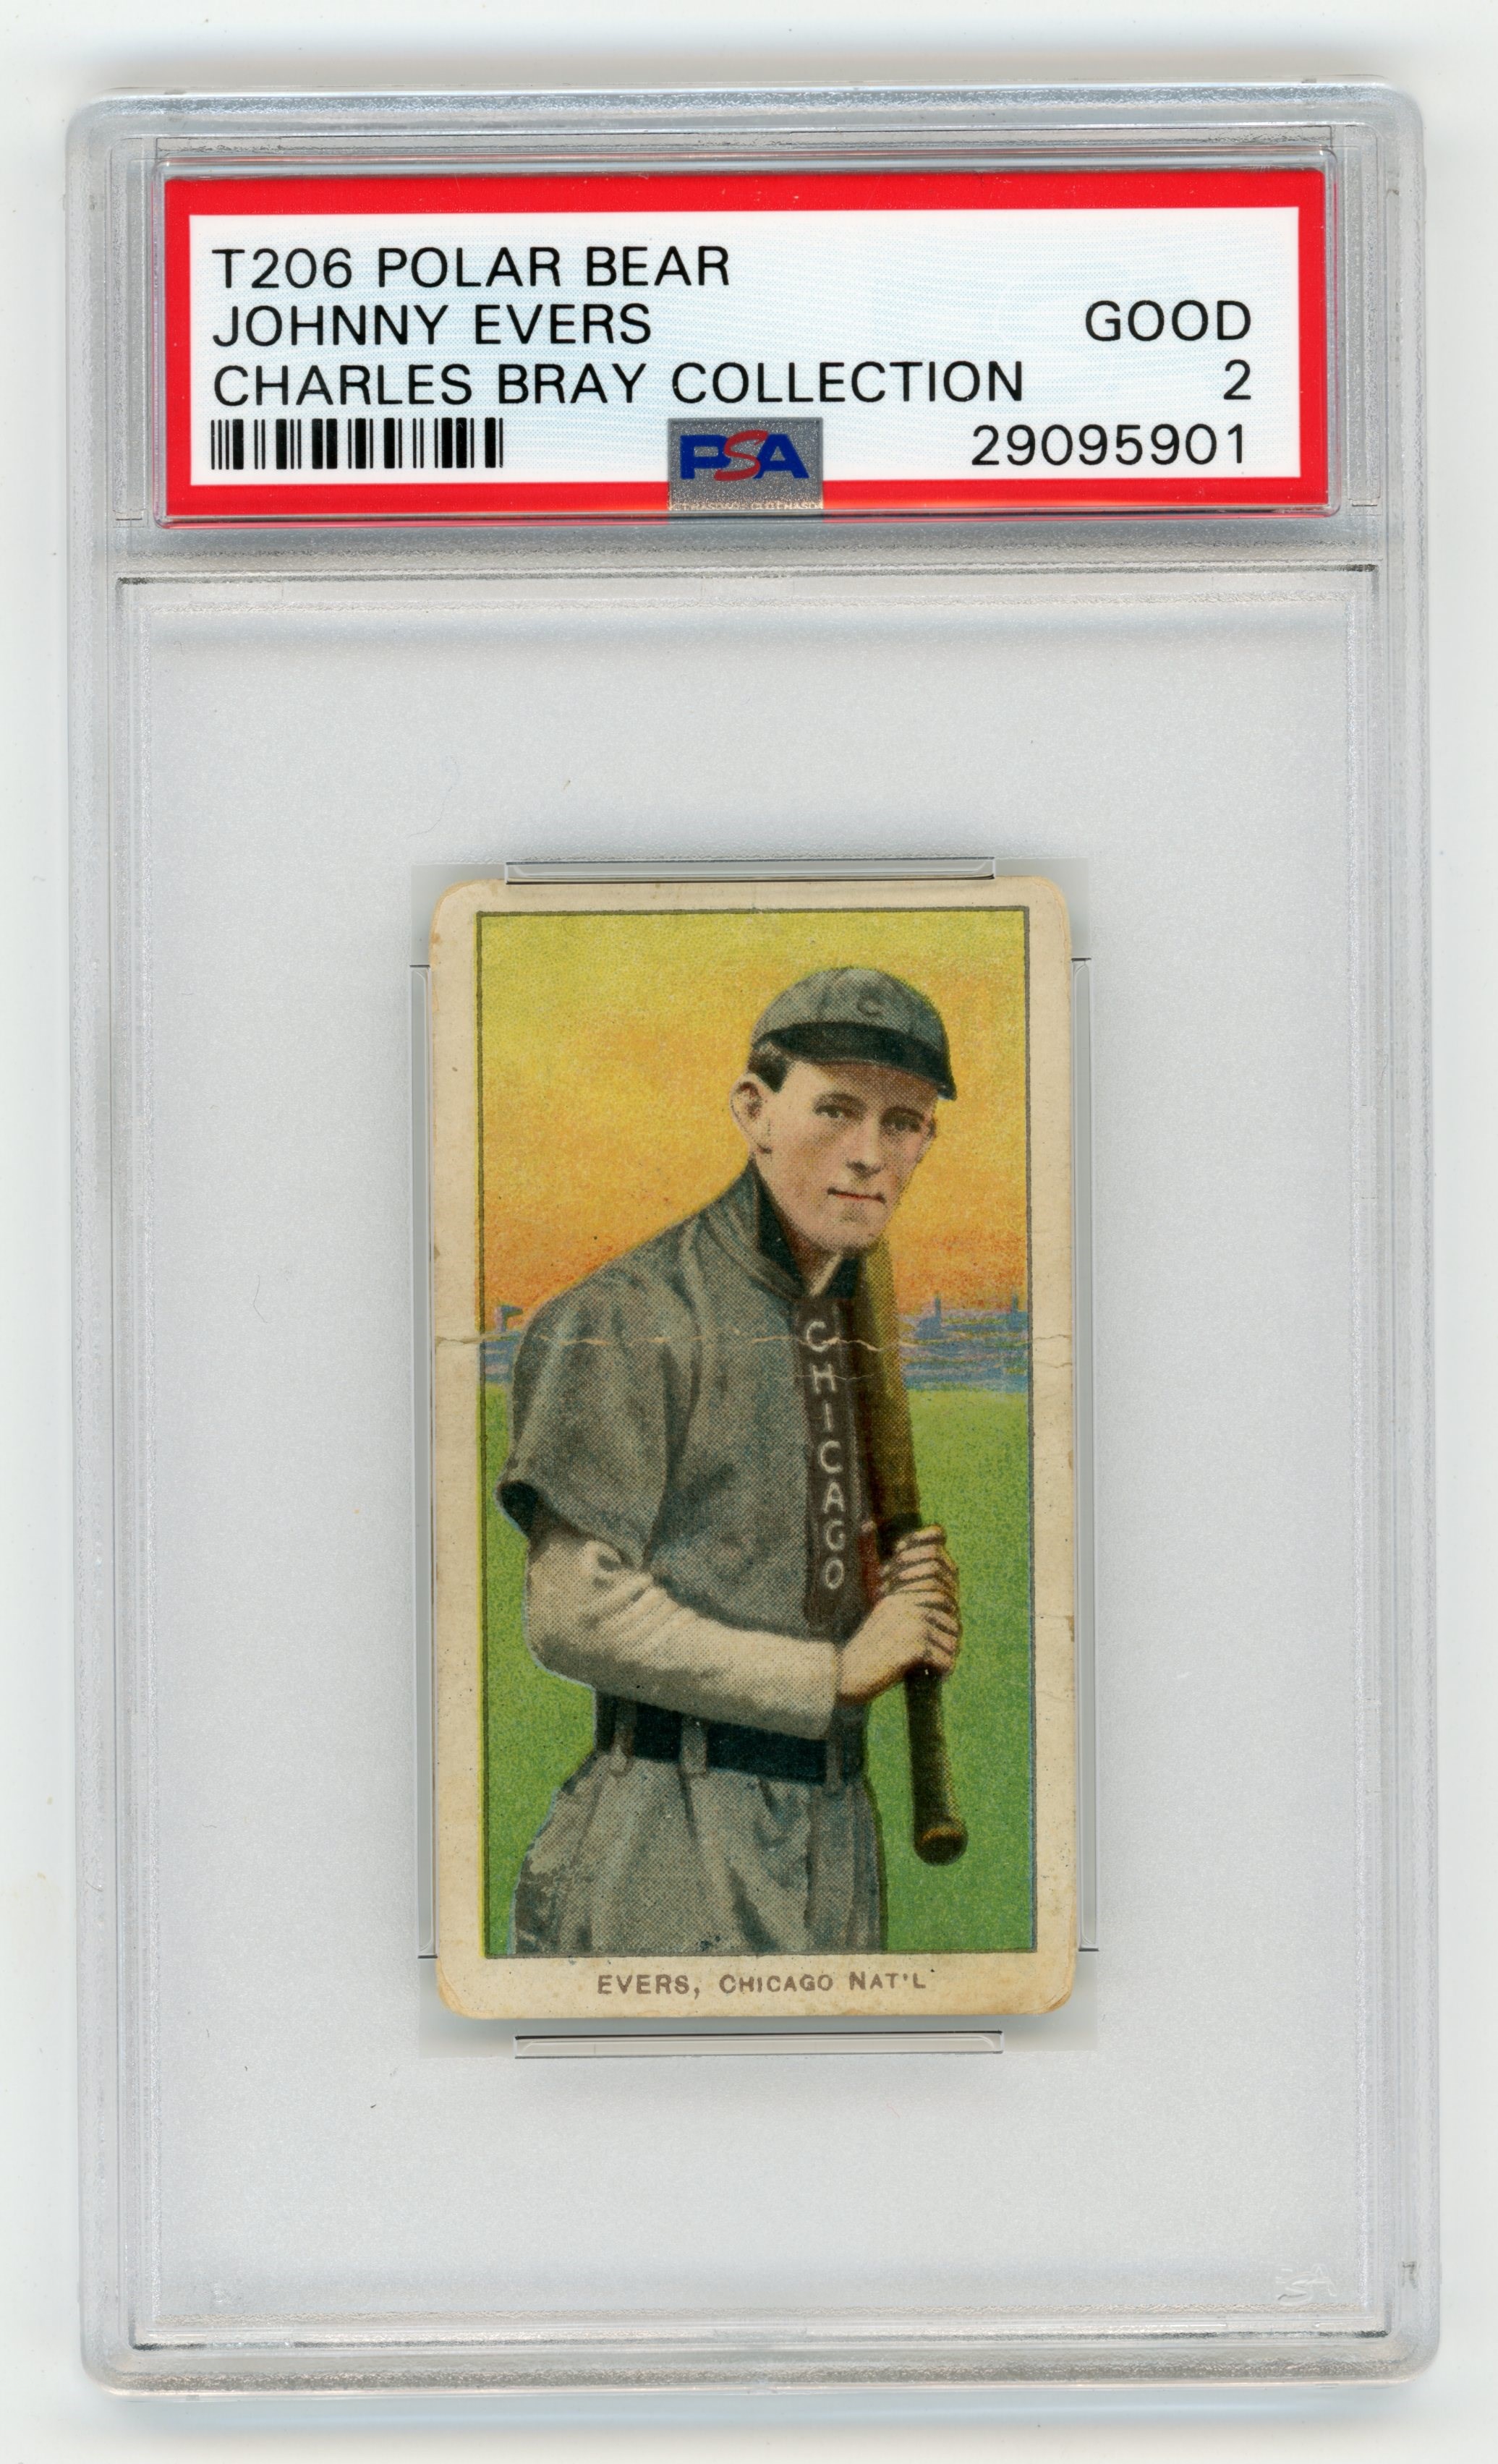 - T206 Polar Bear Johnny Evers PSA 2 From Charles Bray Collection